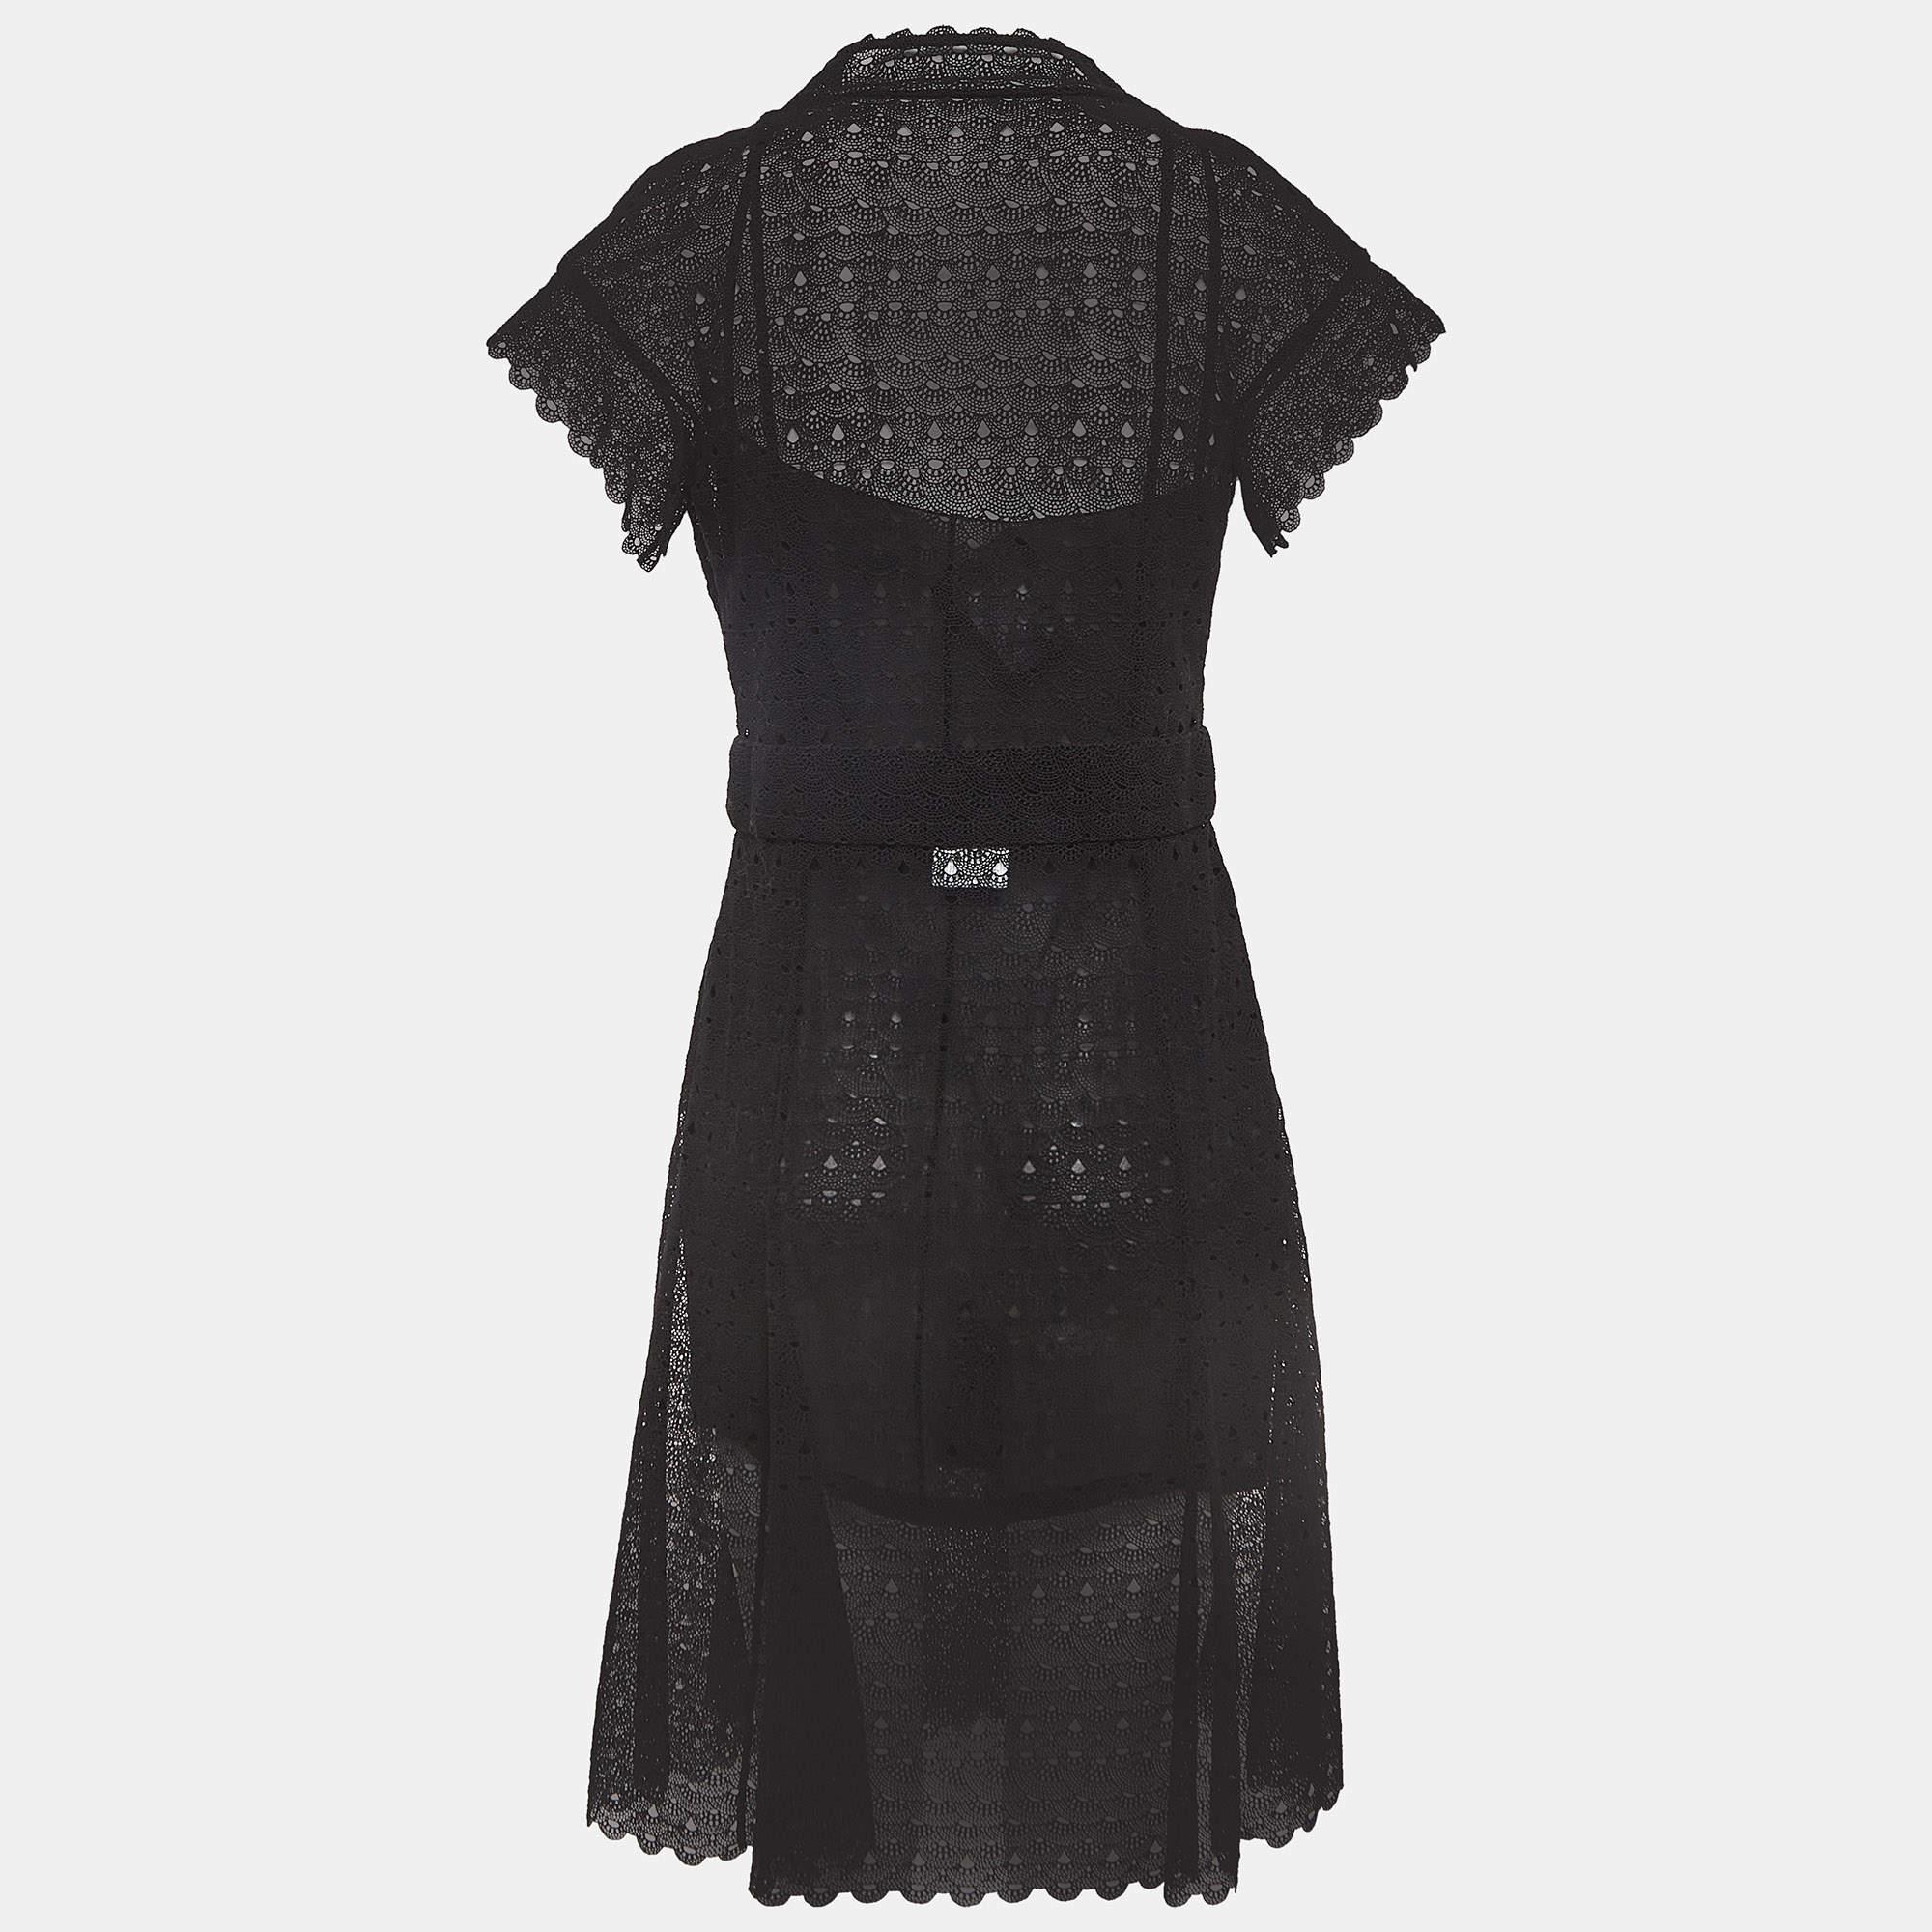 Experience the allure of Chanel's dress. Crafted with meticulous detail, this piece exudes understated charm. Delicate crochet work meets semi-sheer fabric, while button accents add a touch of refinement. Effortlessly chic, it's a timeless addition